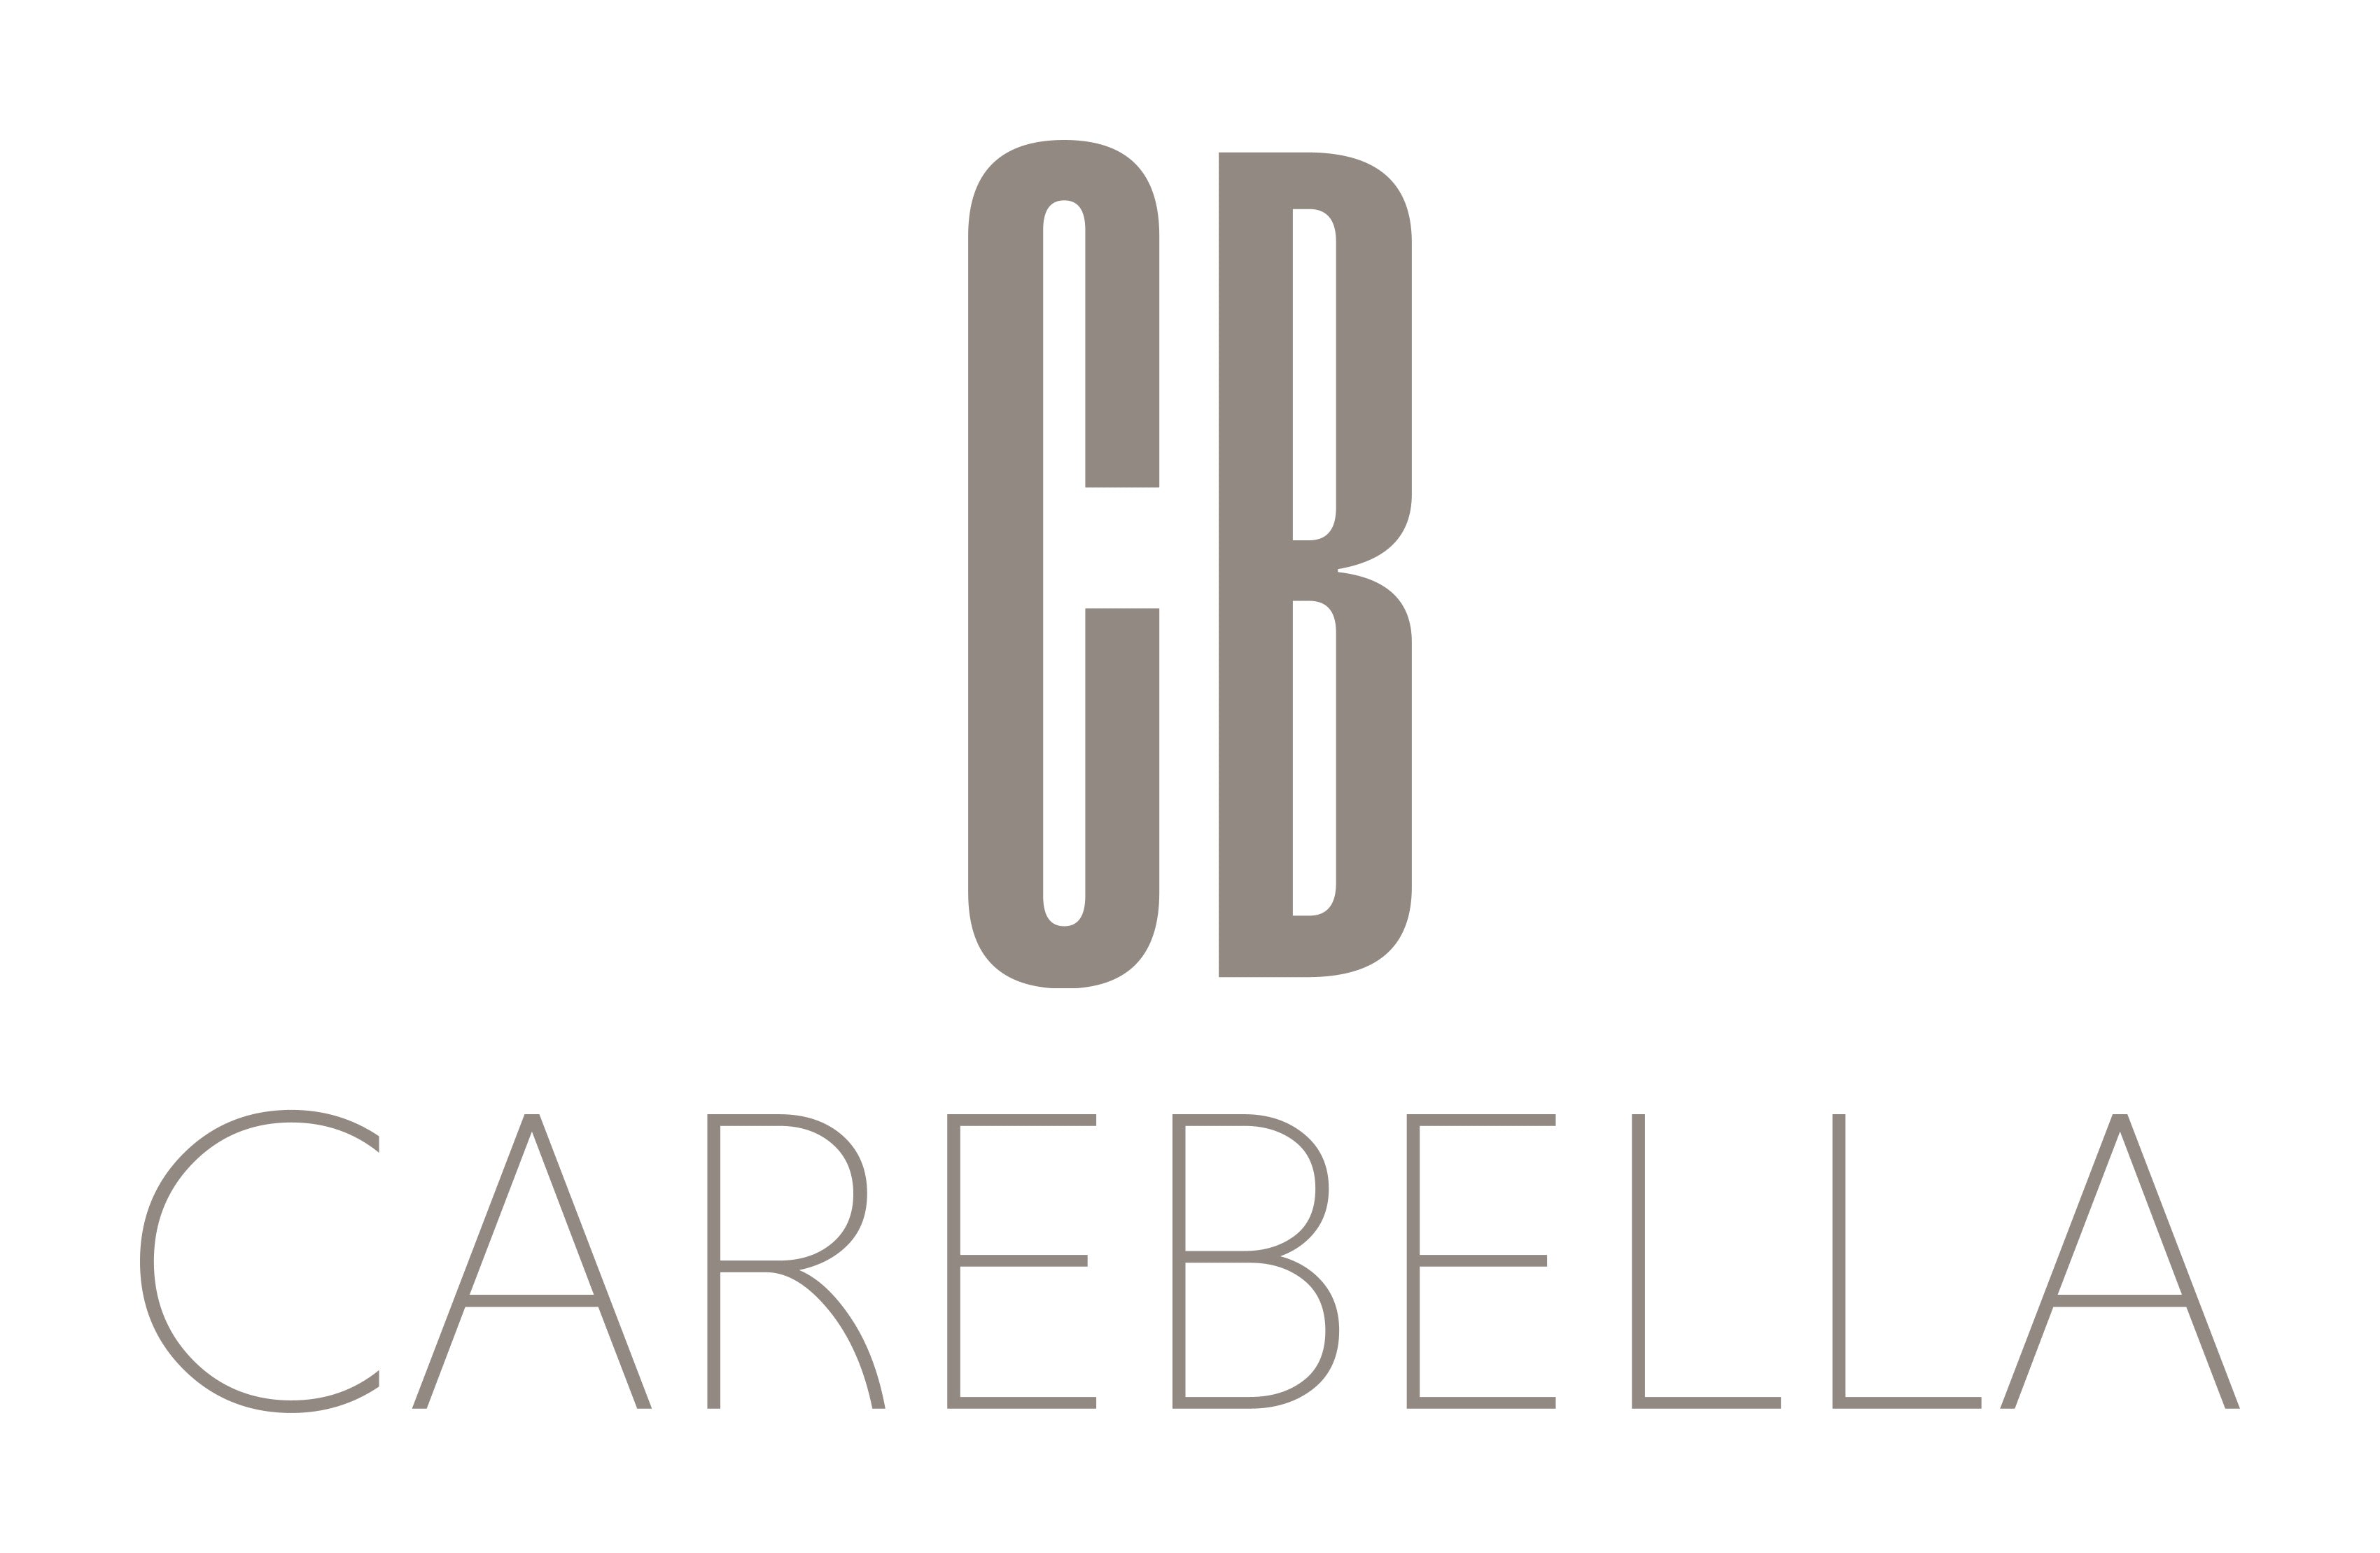 Carebella Store is a fashion brand for women and kids. Discover all CAREBELLA collections for women and kids and buy all of the latest fashion trends, ladieswear, summer dress, t-shirts, tees, tops and accessories on our official website.